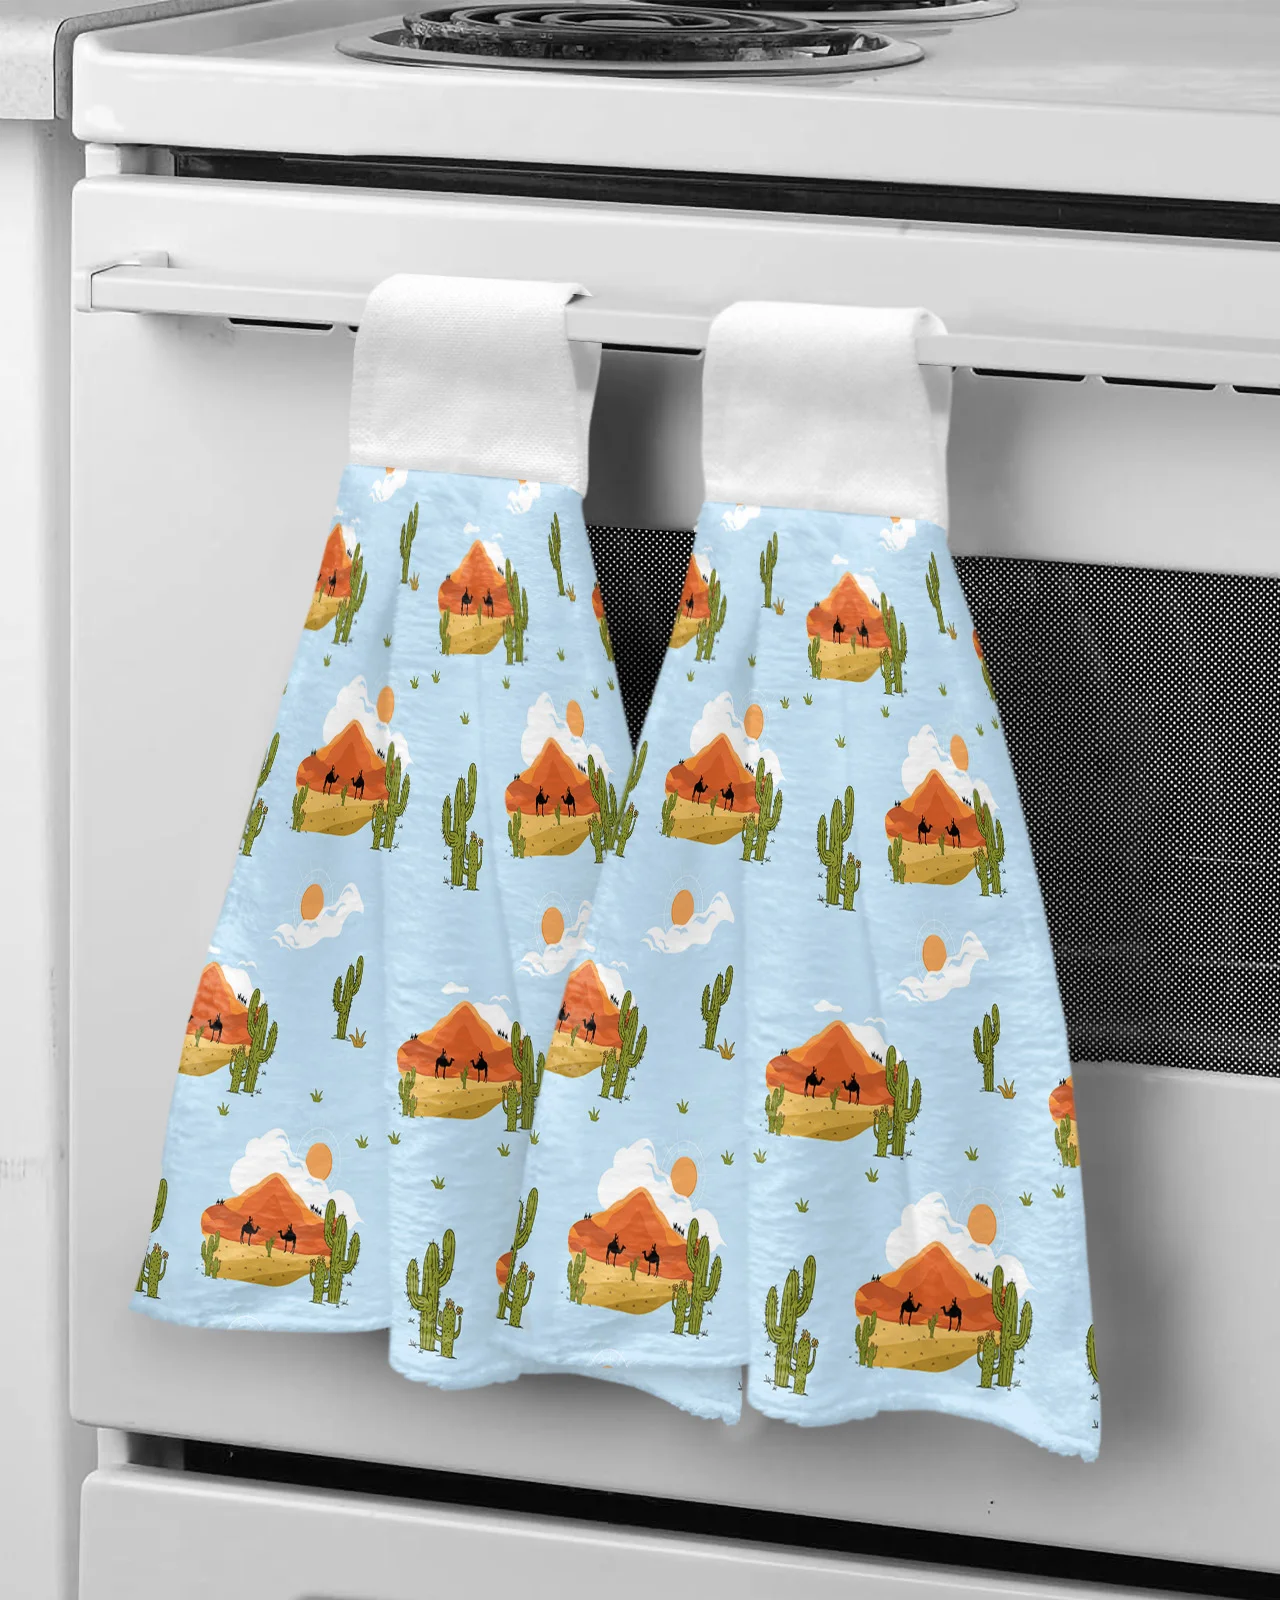 

Hand-Painted Desert Camel Cactus Clouds Hand Towel Microfiber Hanging Wipes Cloth Cleaning Towel Kitchen Tools Accessories